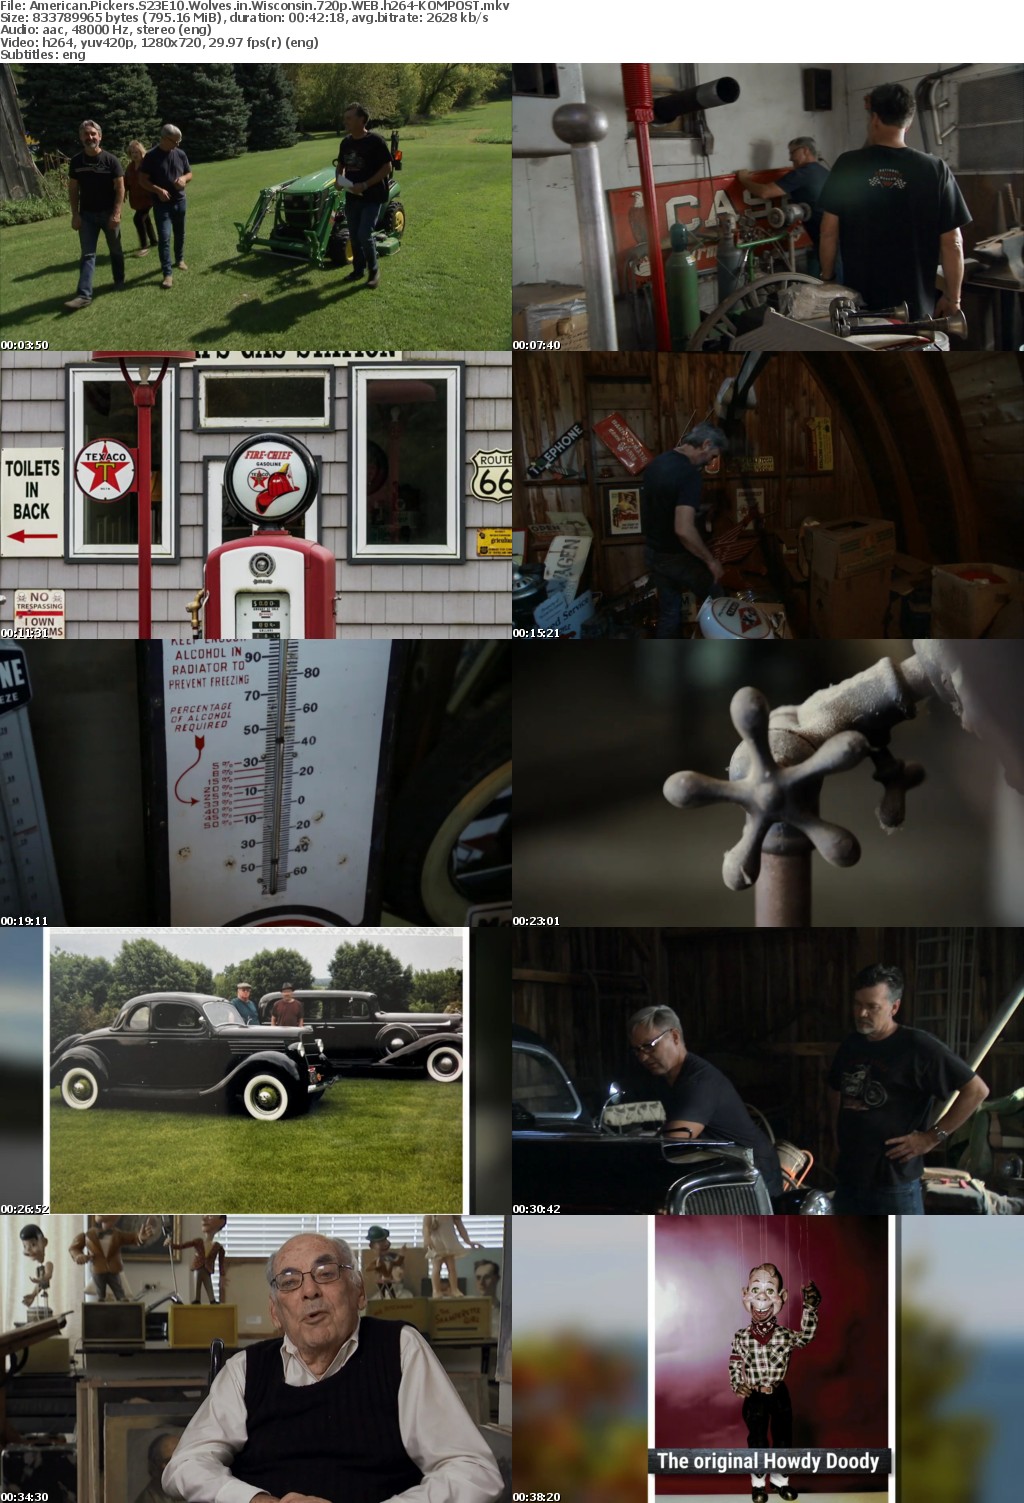 American Pickers S23E10 Wolves in Wisconsin 720p WEB h264-KOMPOST